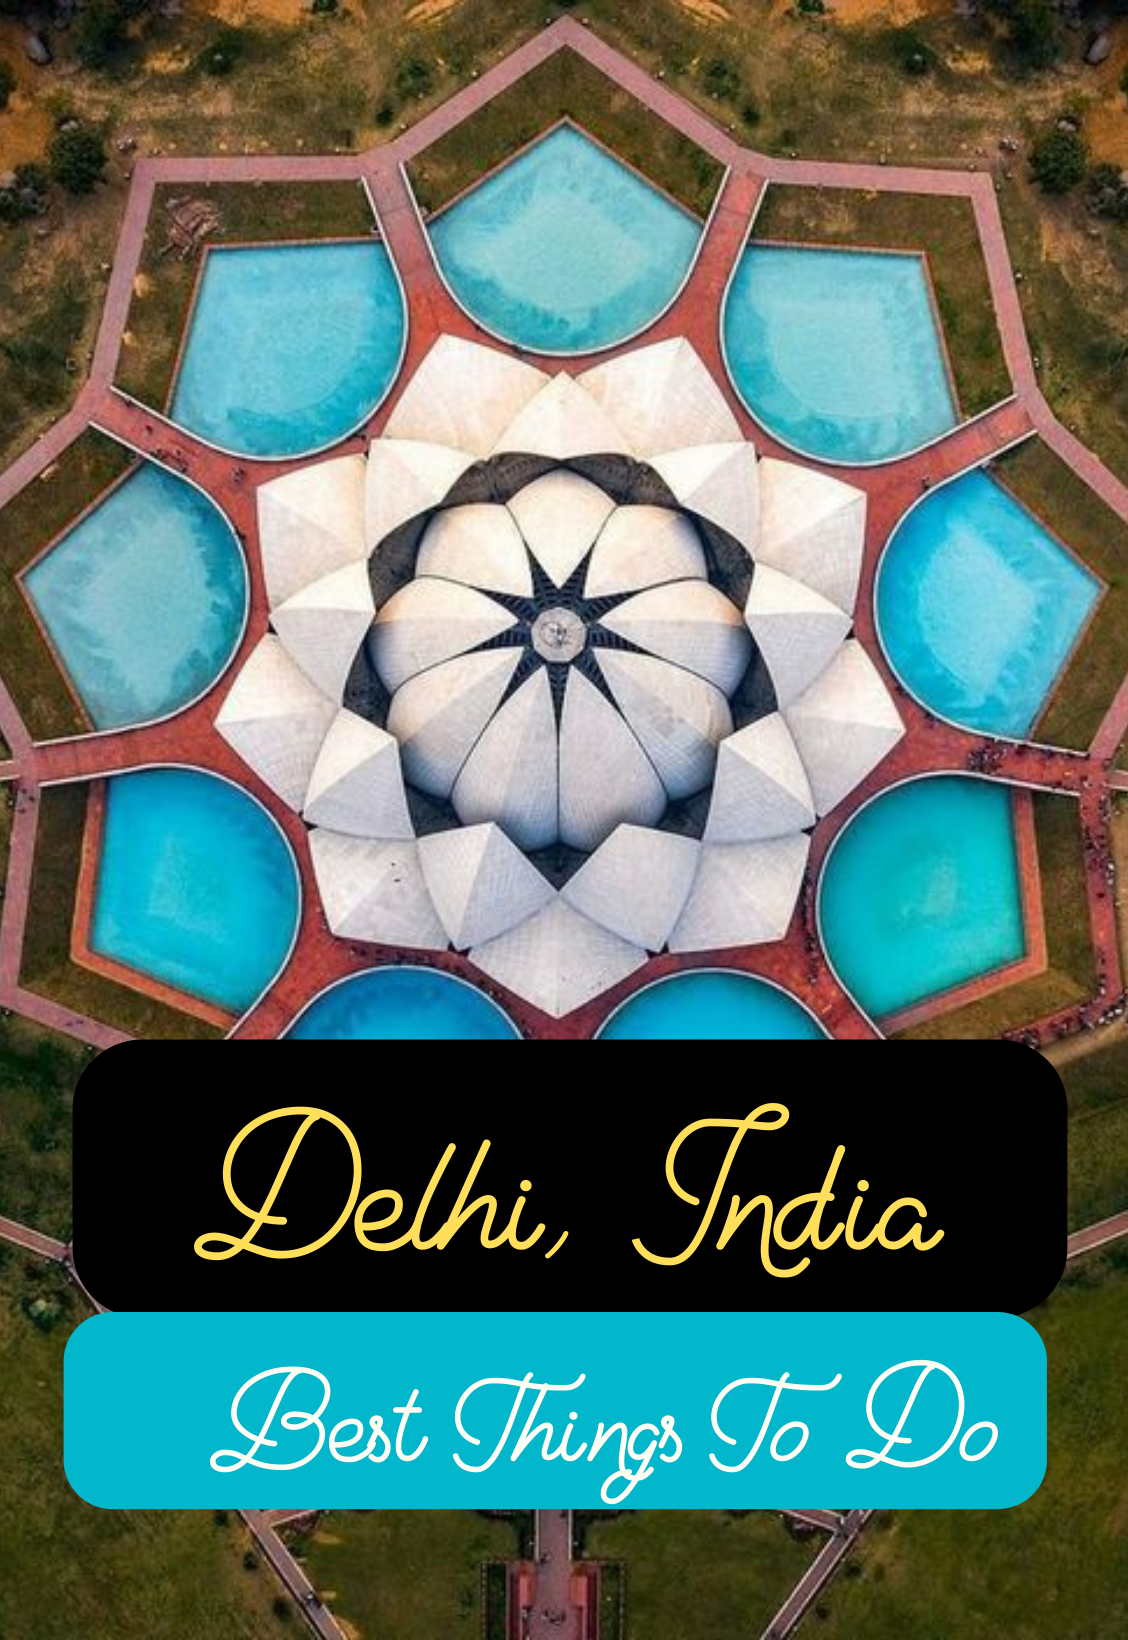 Delhi, India - Best things to do